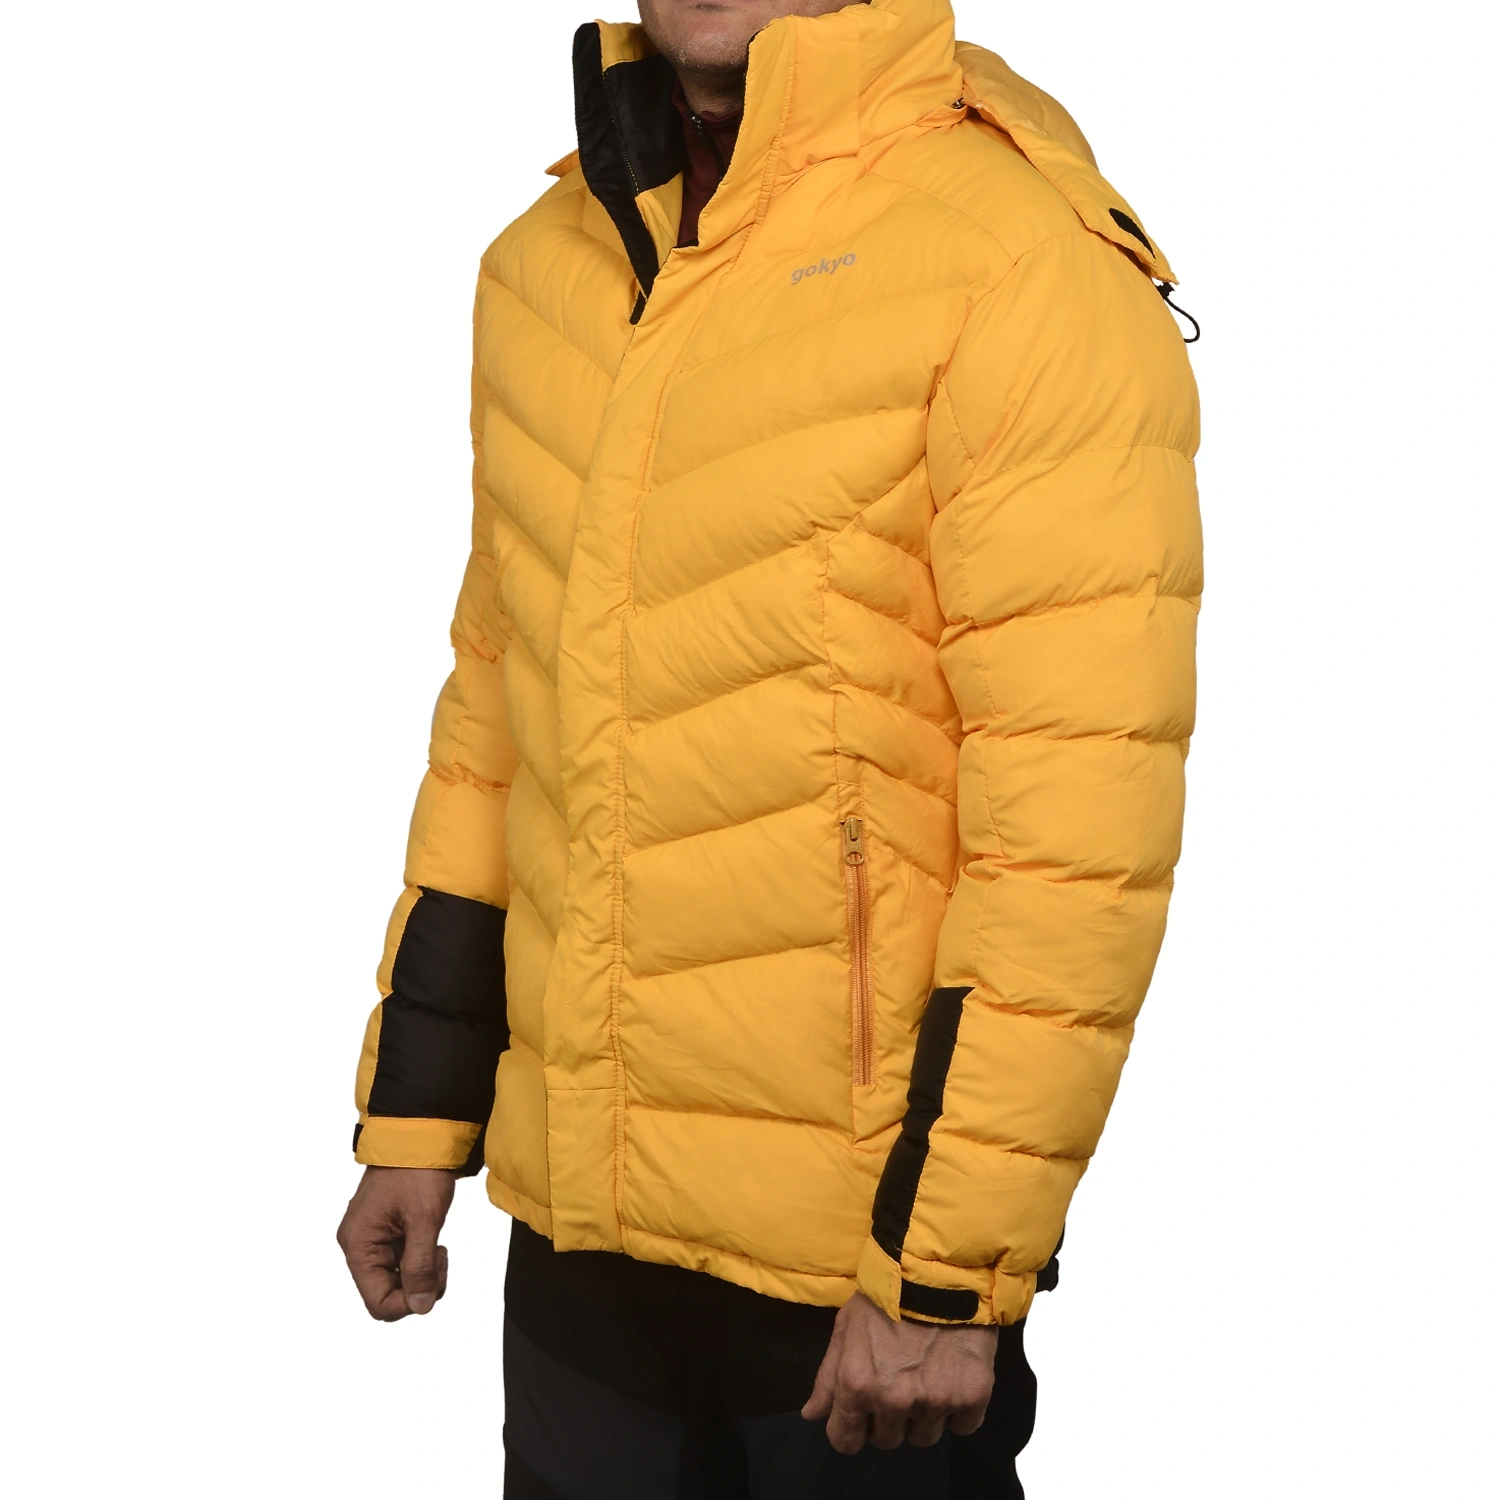 K2 Survivor Down Jacket for Men: Stylized Functionality for Extreme Cold Weather Expeditions (Up to -20°C)-4XL-Yellow-2